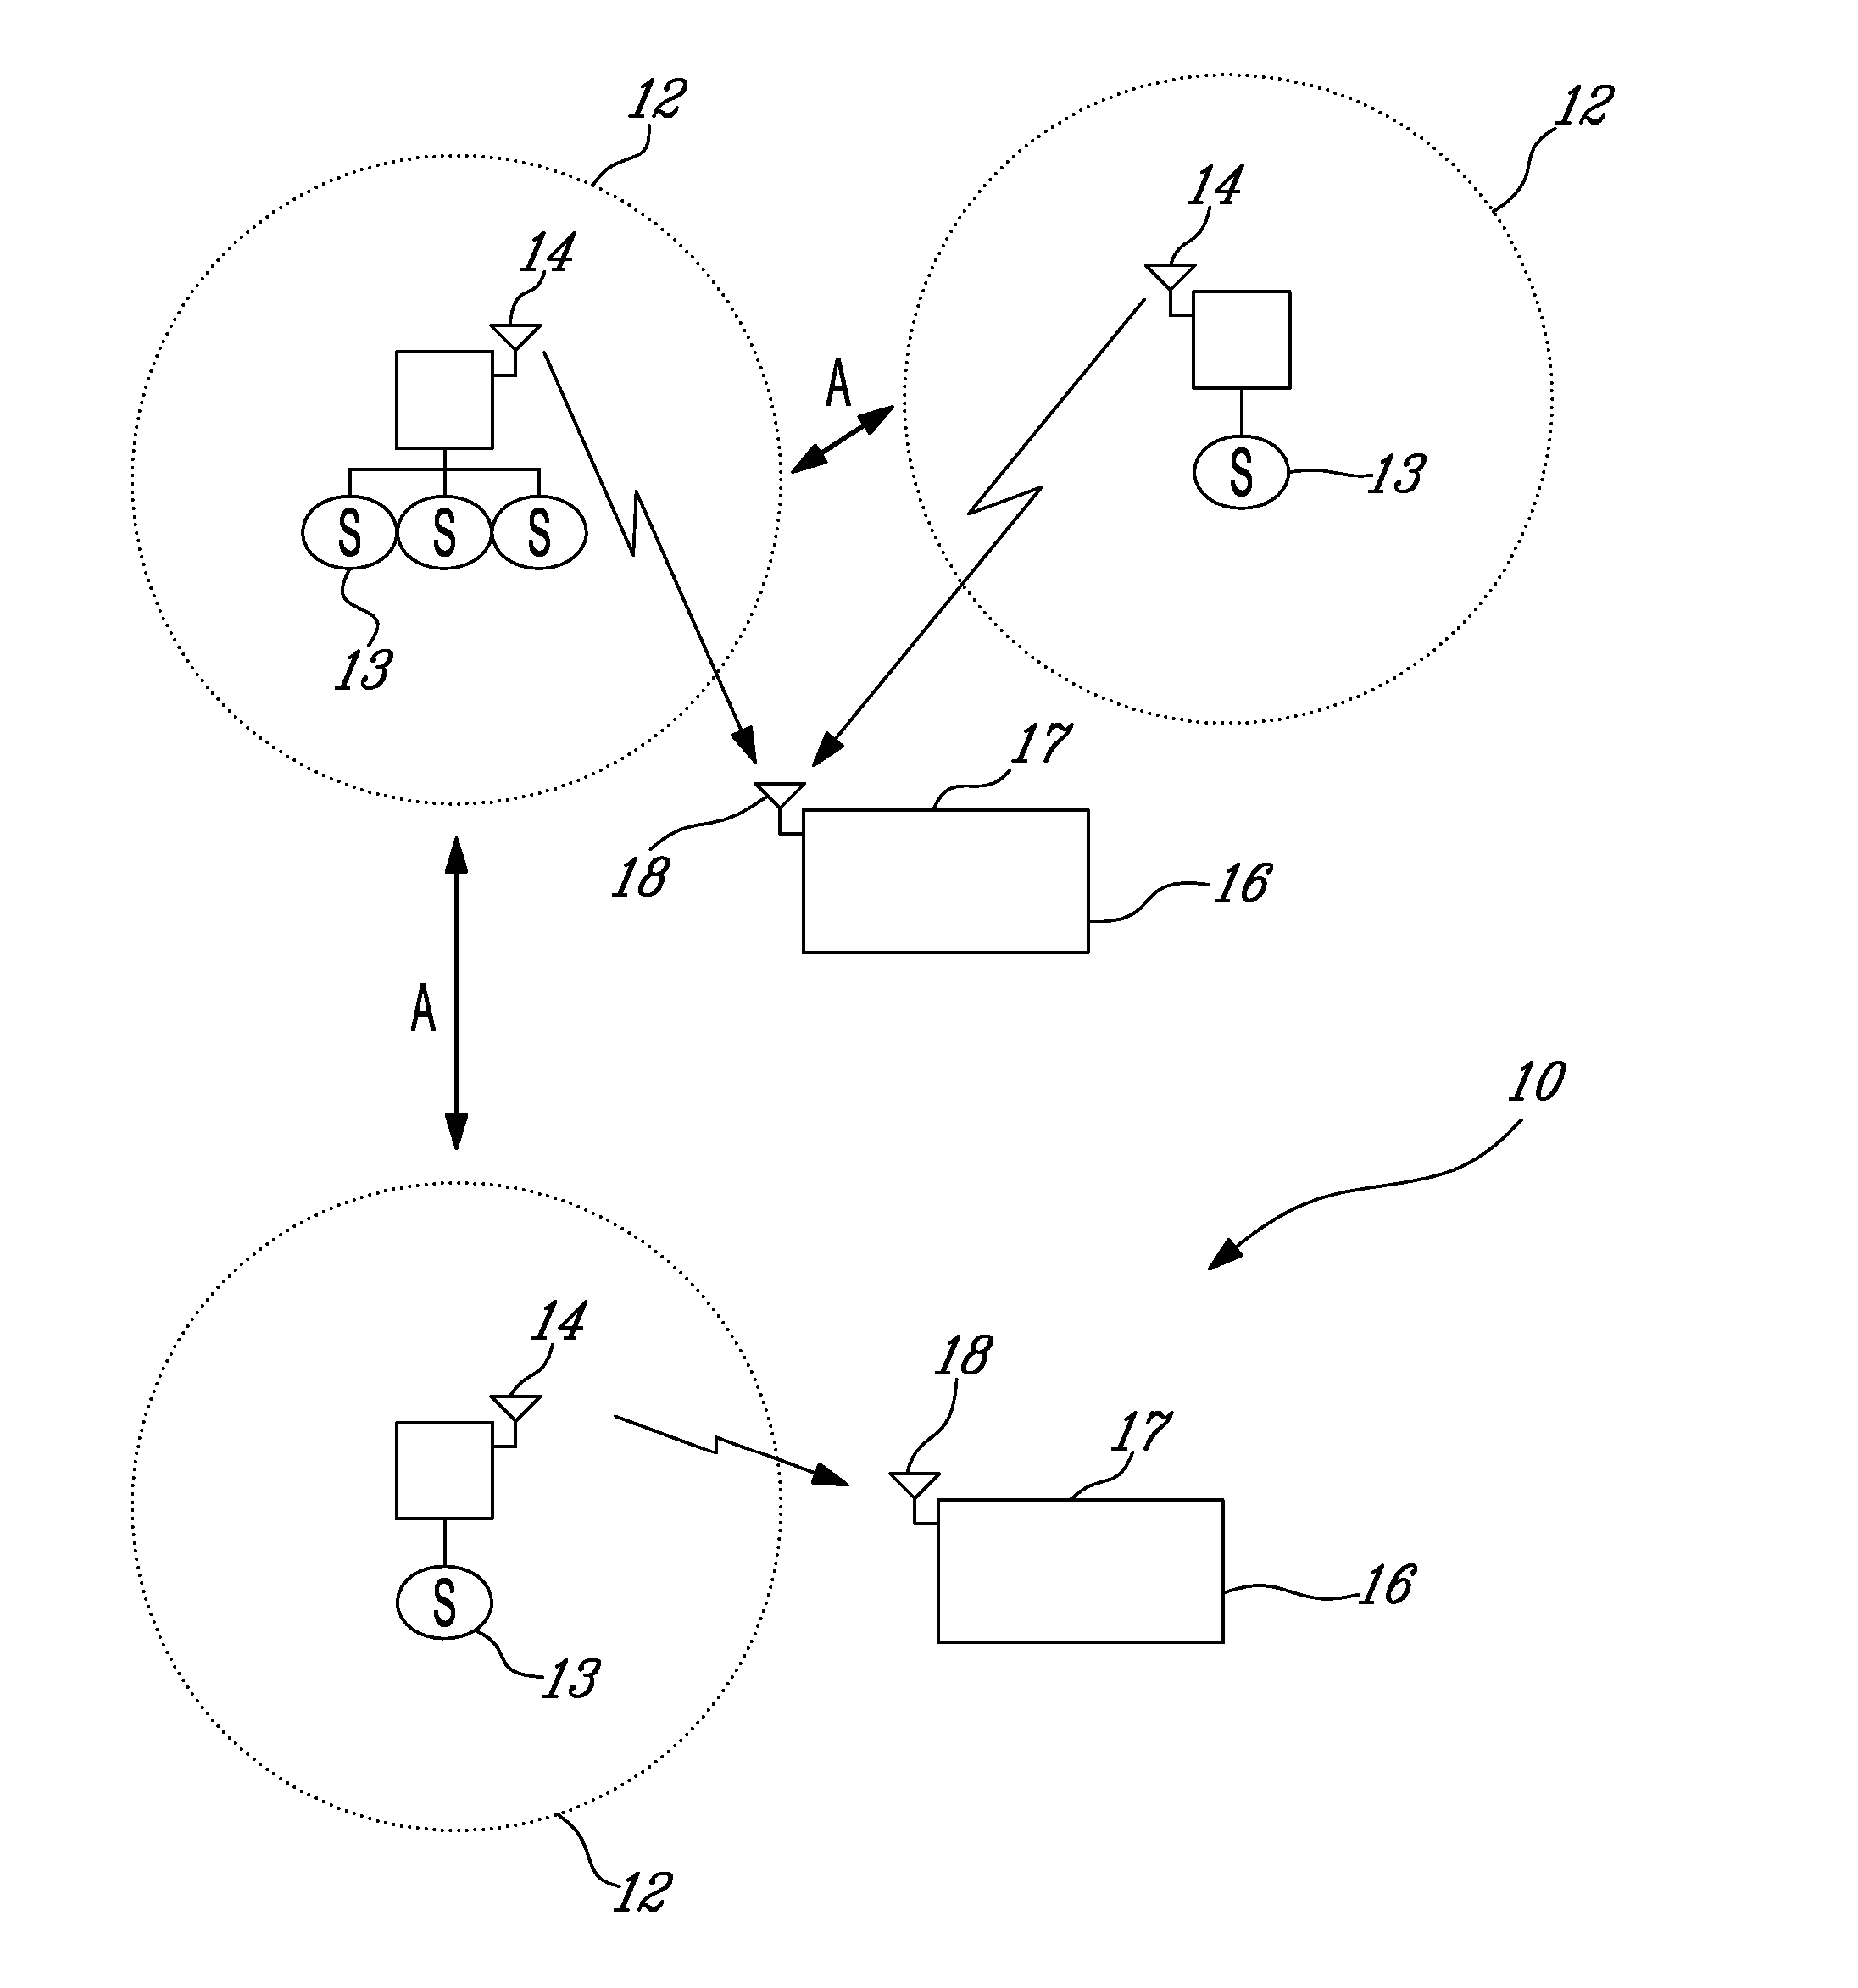 Automatic channel switching method for low-power communication devices